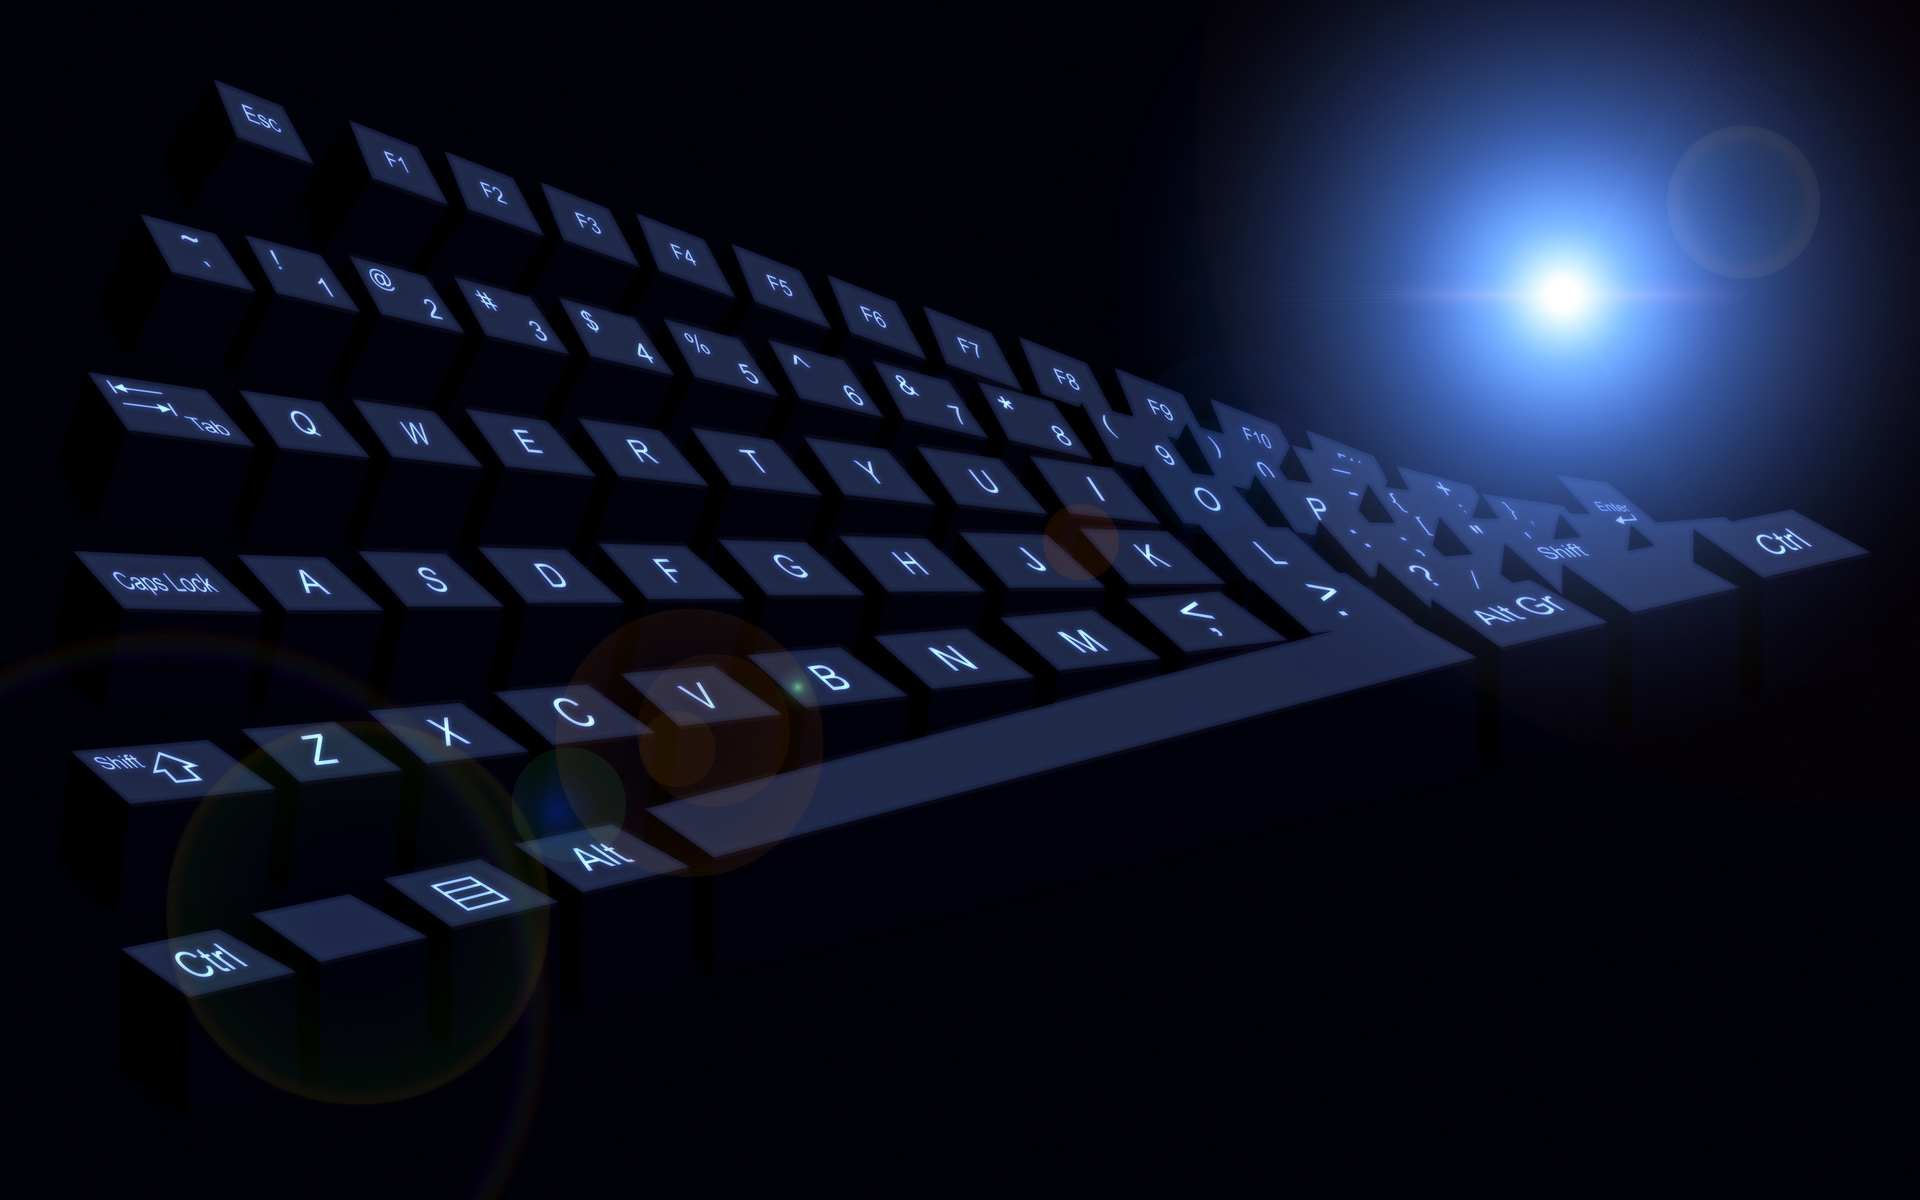  Keyboard  Wallpapers  Pictures Images